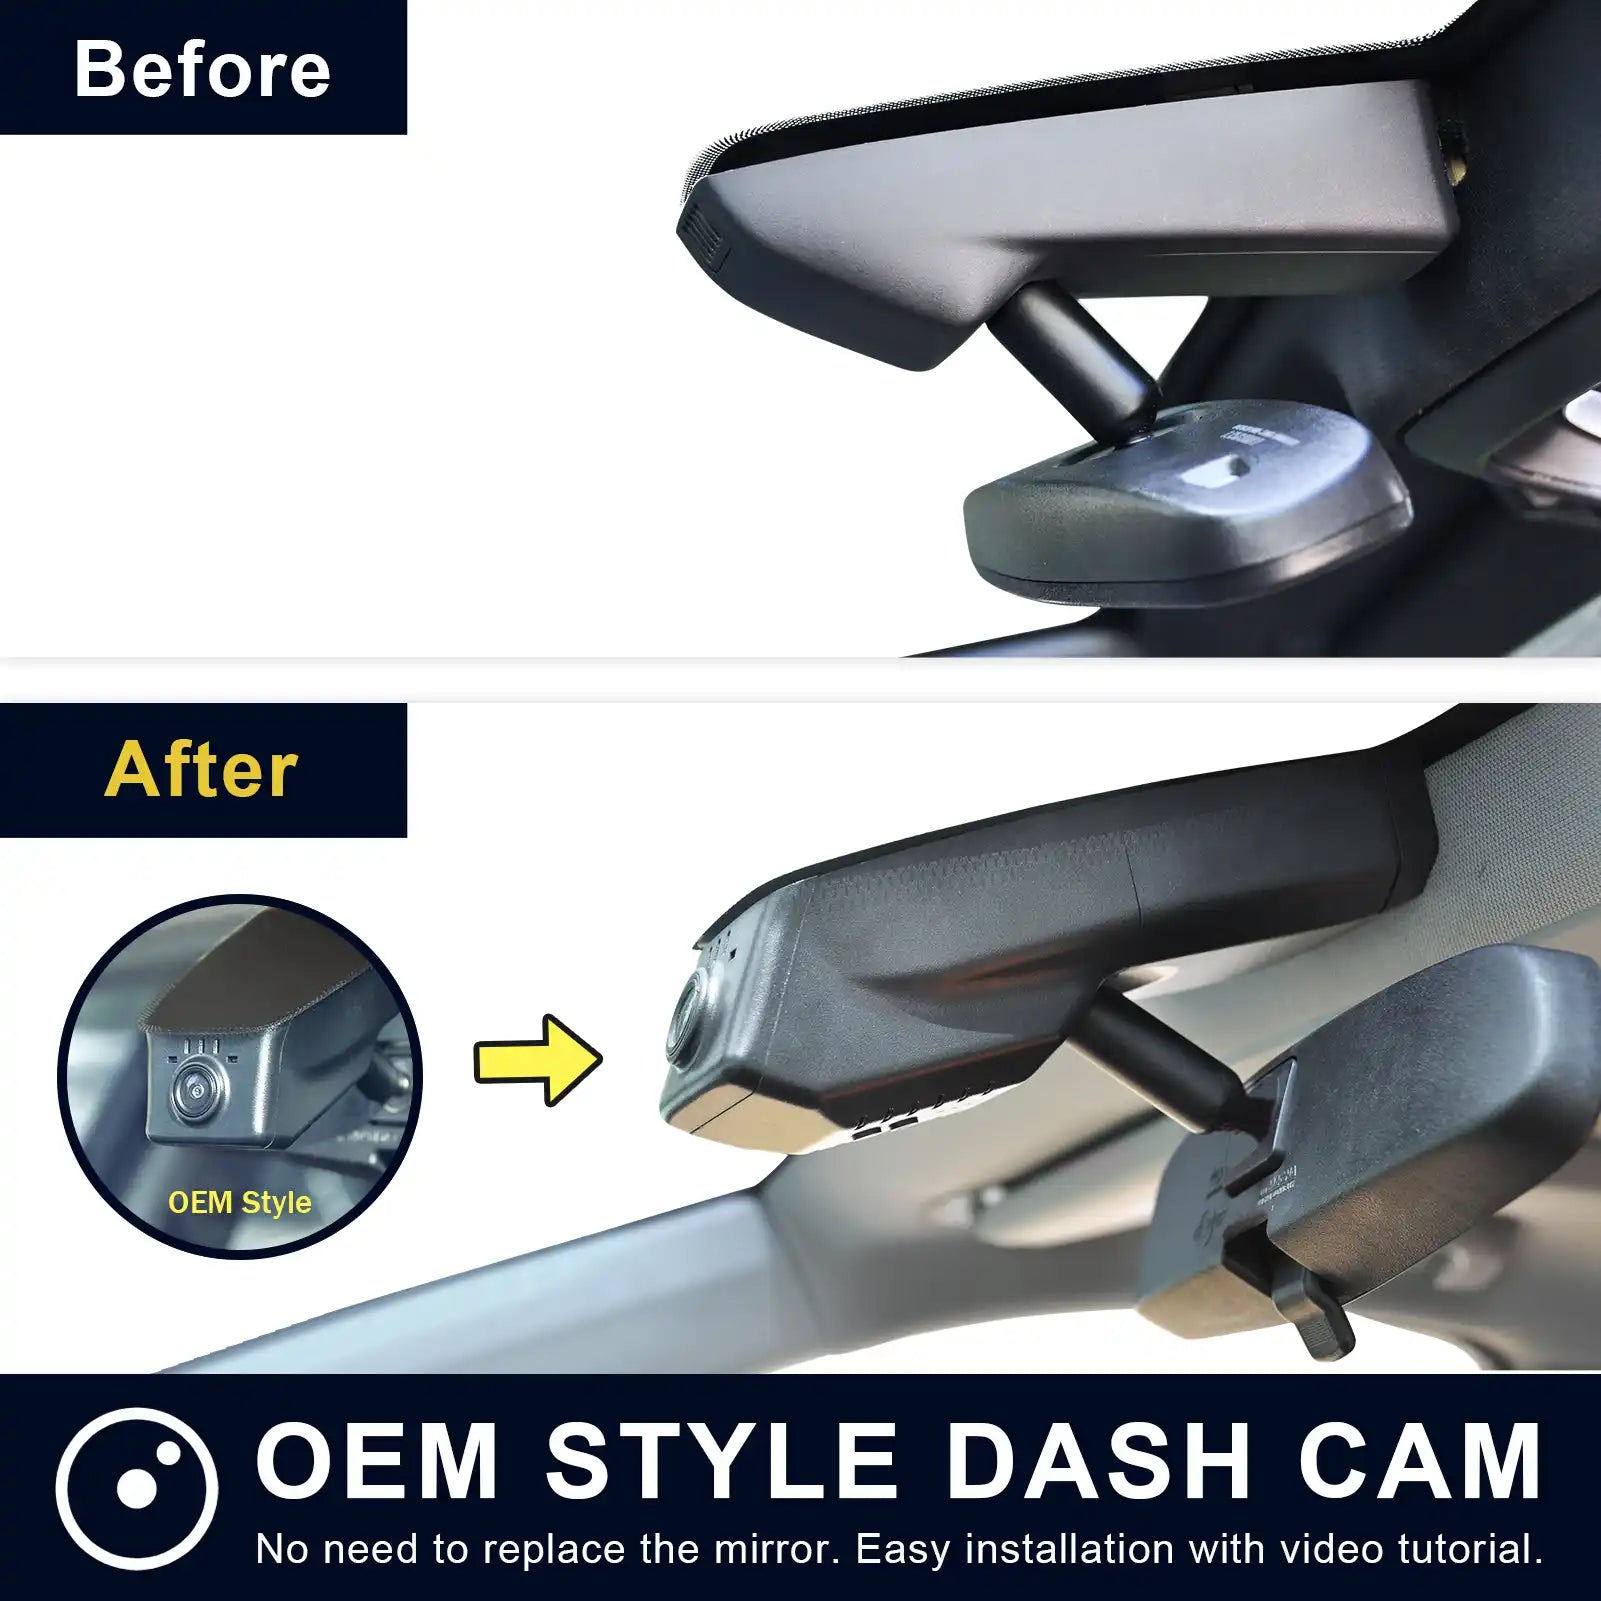 GMC Acadia dash cam before and after installation view 